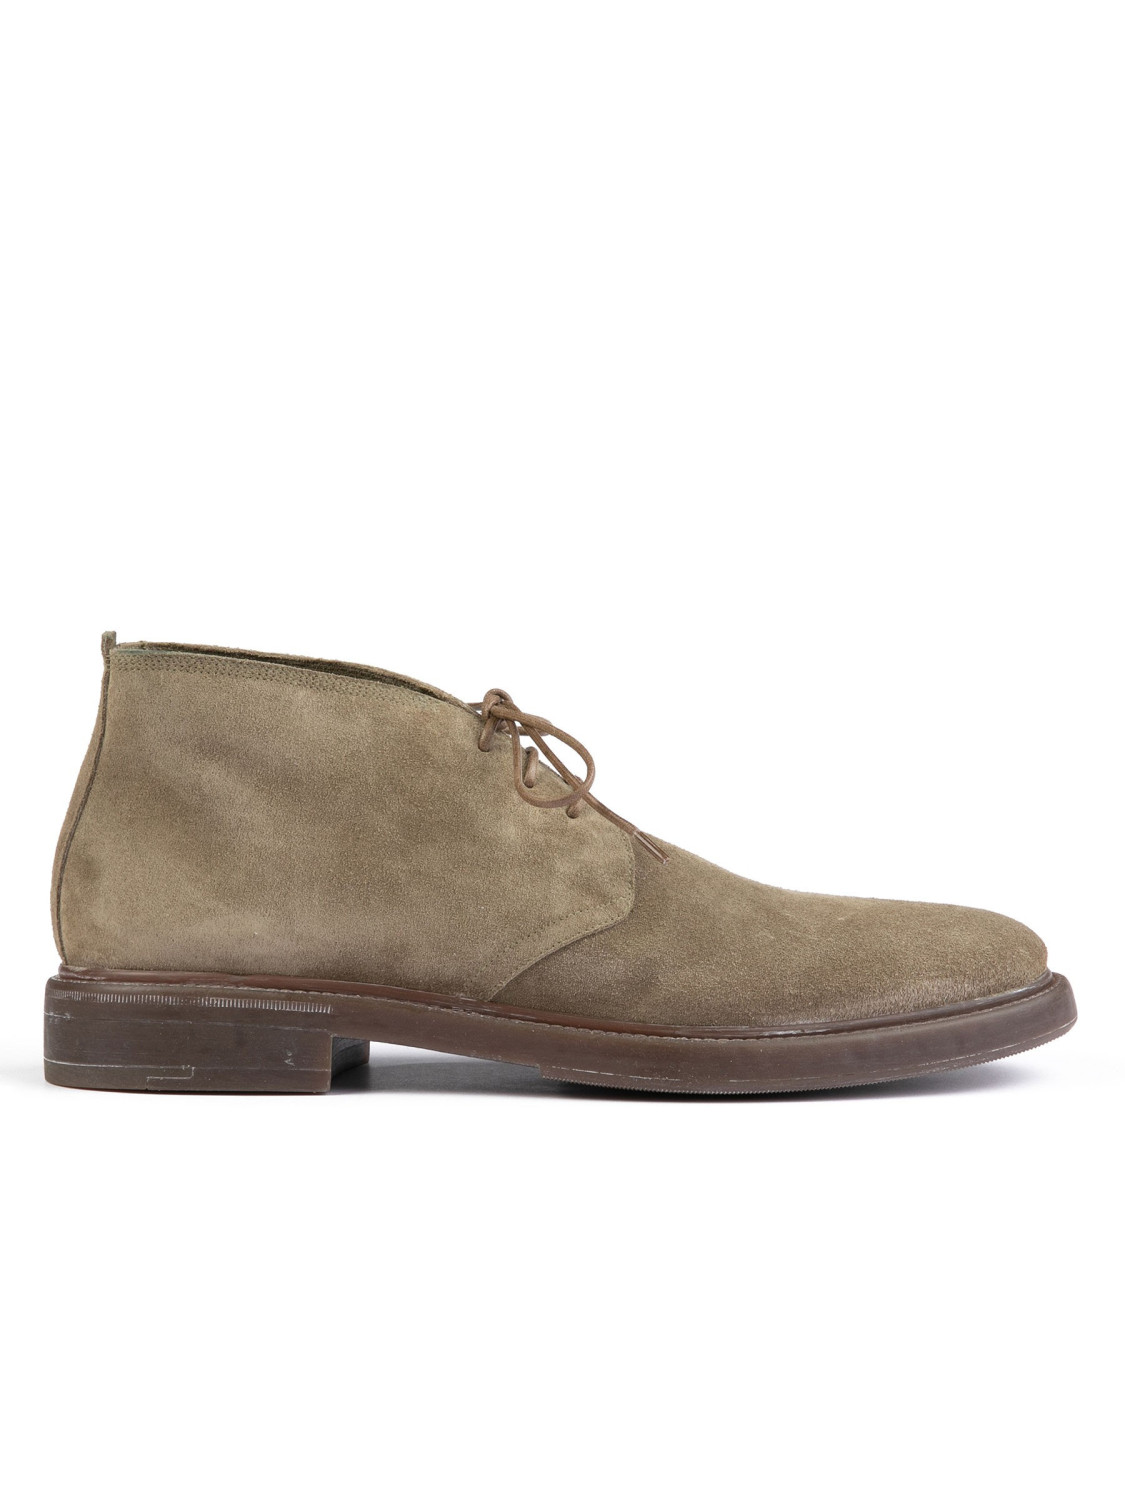 Taupe suede chukka boots